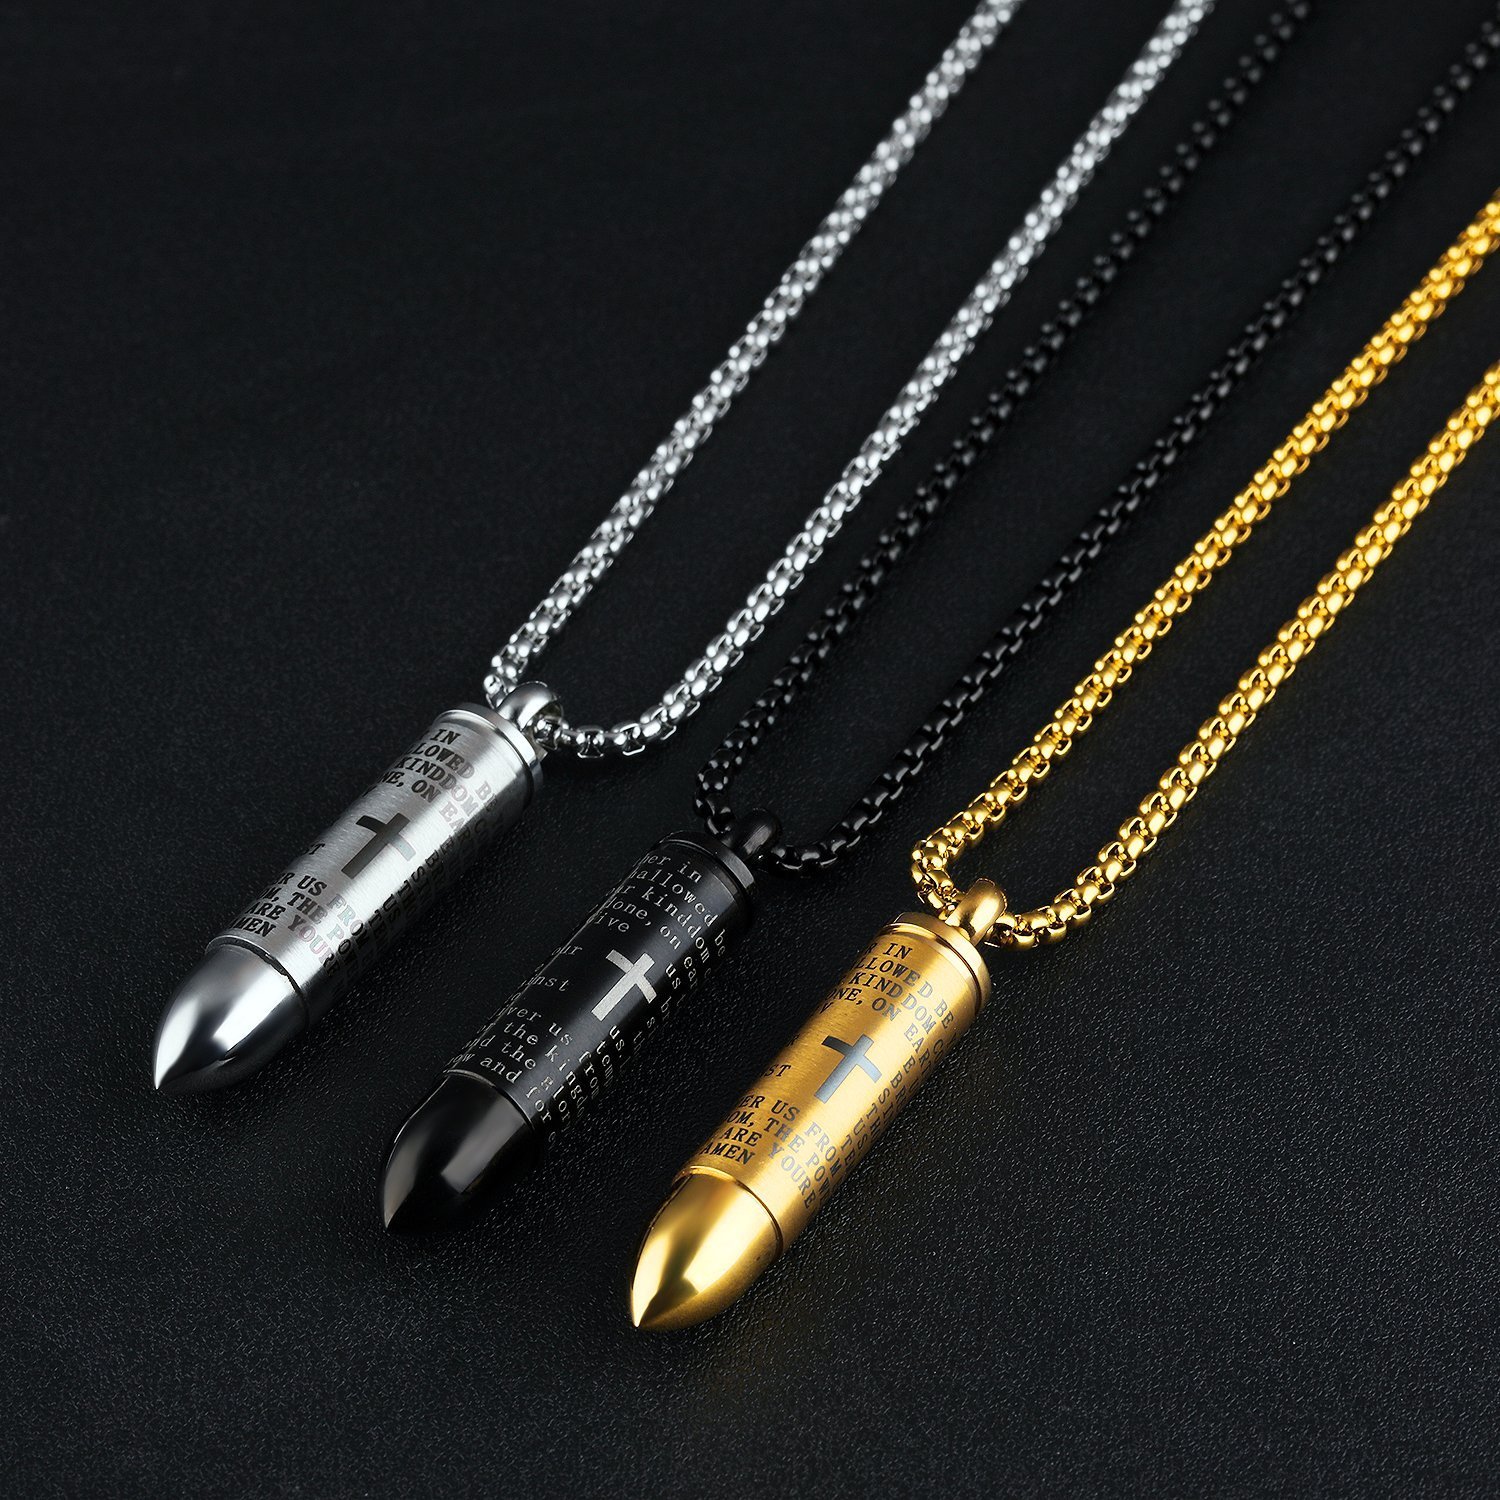 Stainless Steel English Lord's Prayer Cross Detachable Cremation Urn Bullet Pendant Necklace with 22 Inch Chain (Black Gold Silver Blue)